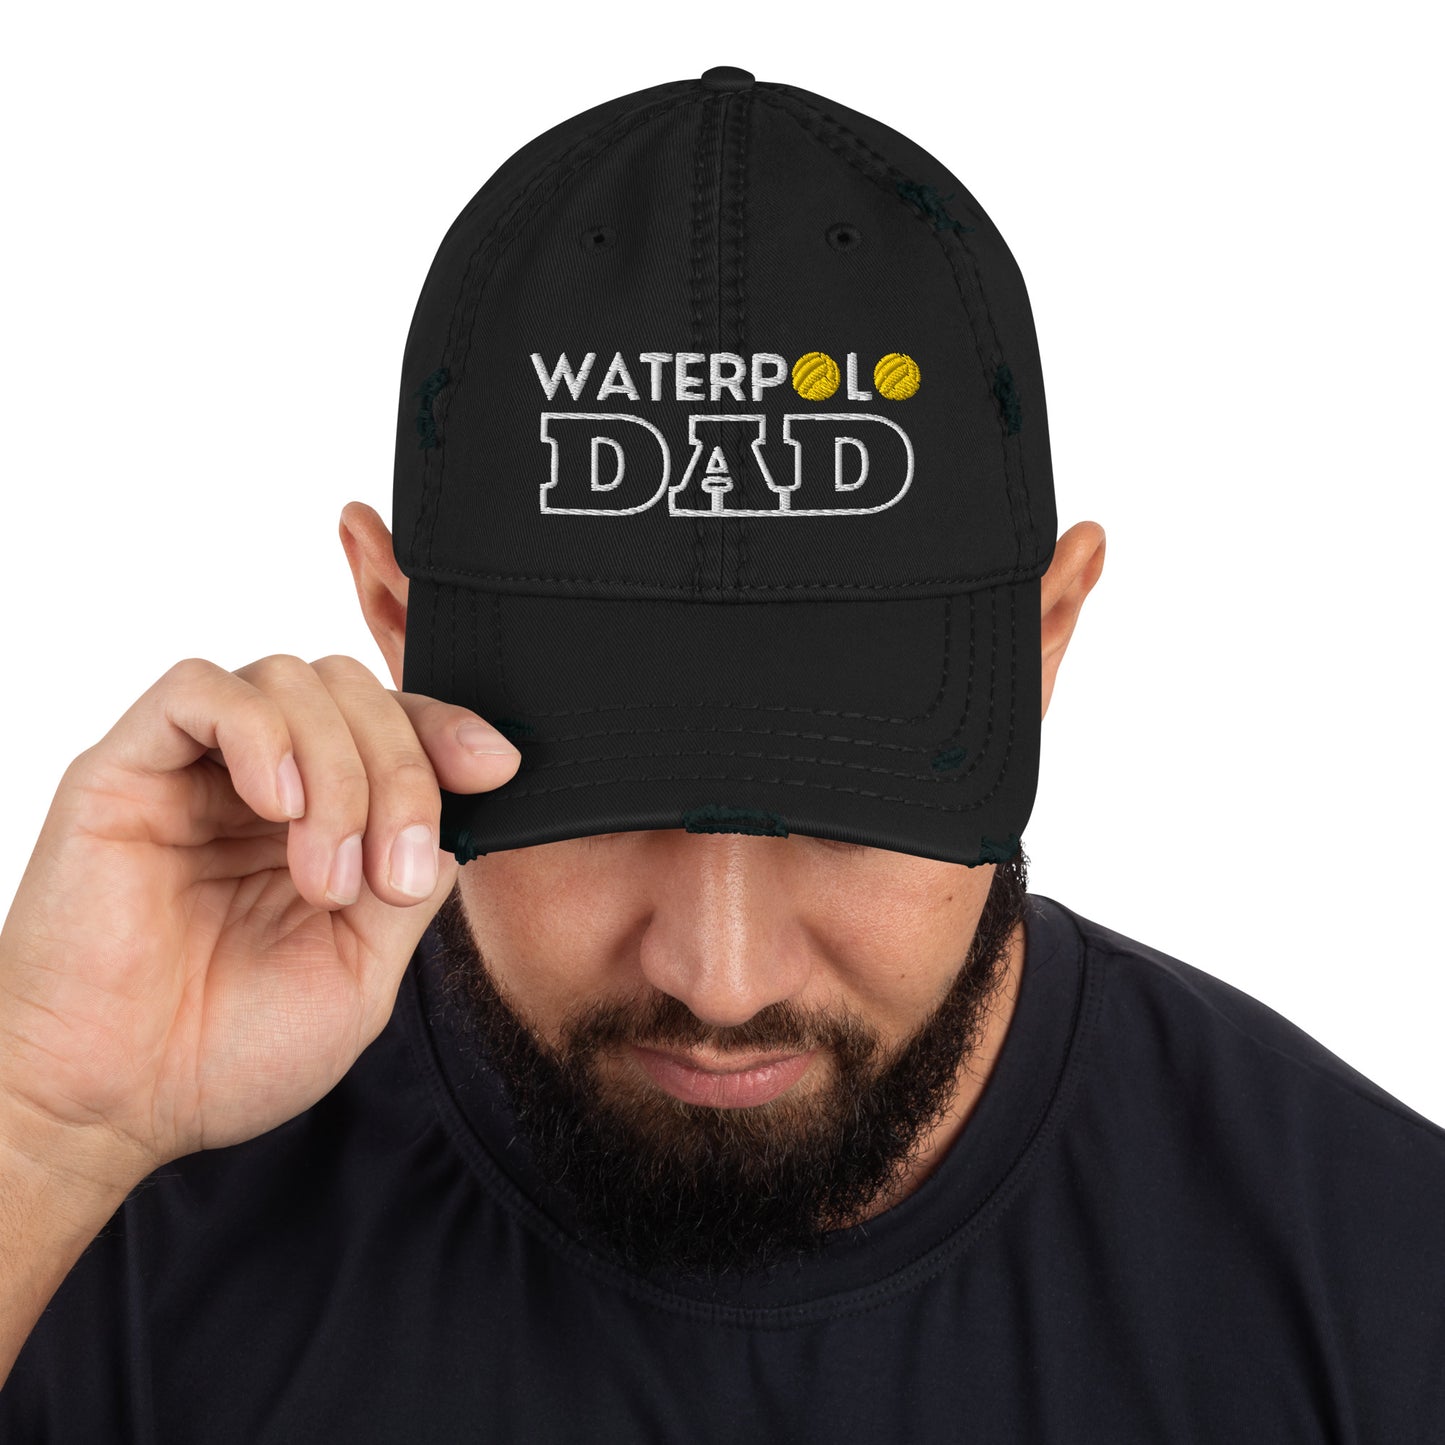 Waterpolo Dad - Embroidered Distressed Dad Hat | Otto Cap 104-1018